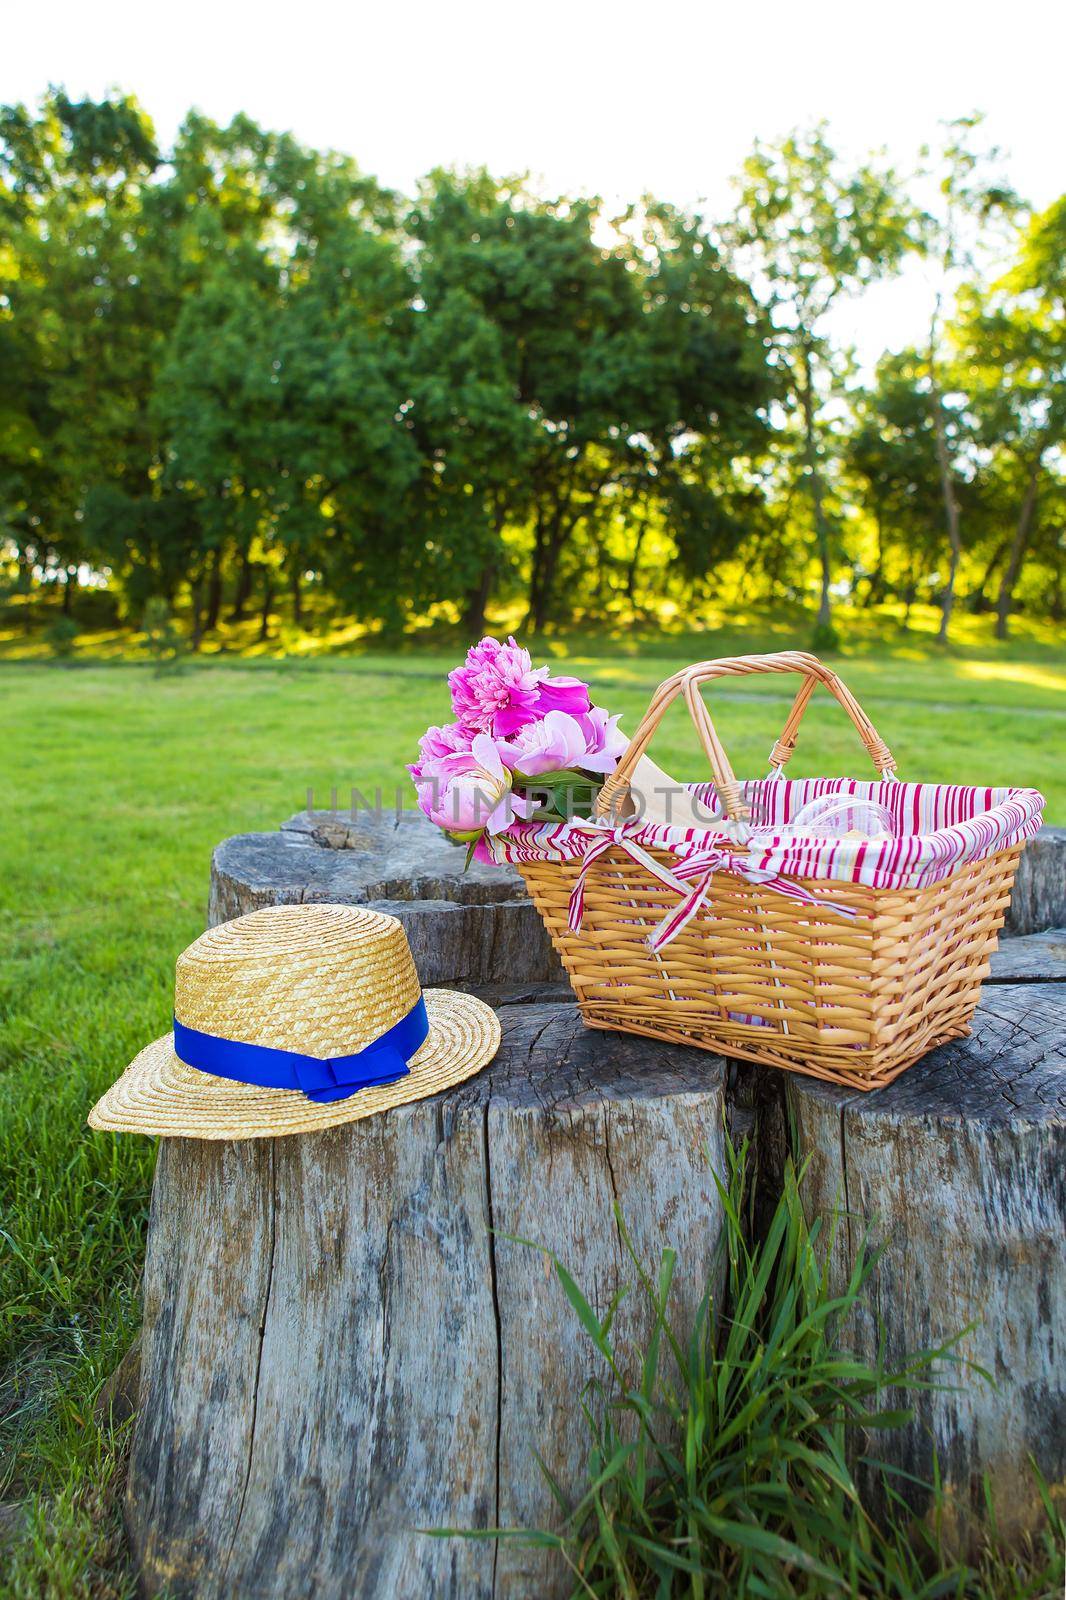 Beautiful straw hat and flowers in a basket stand on a wooden stump